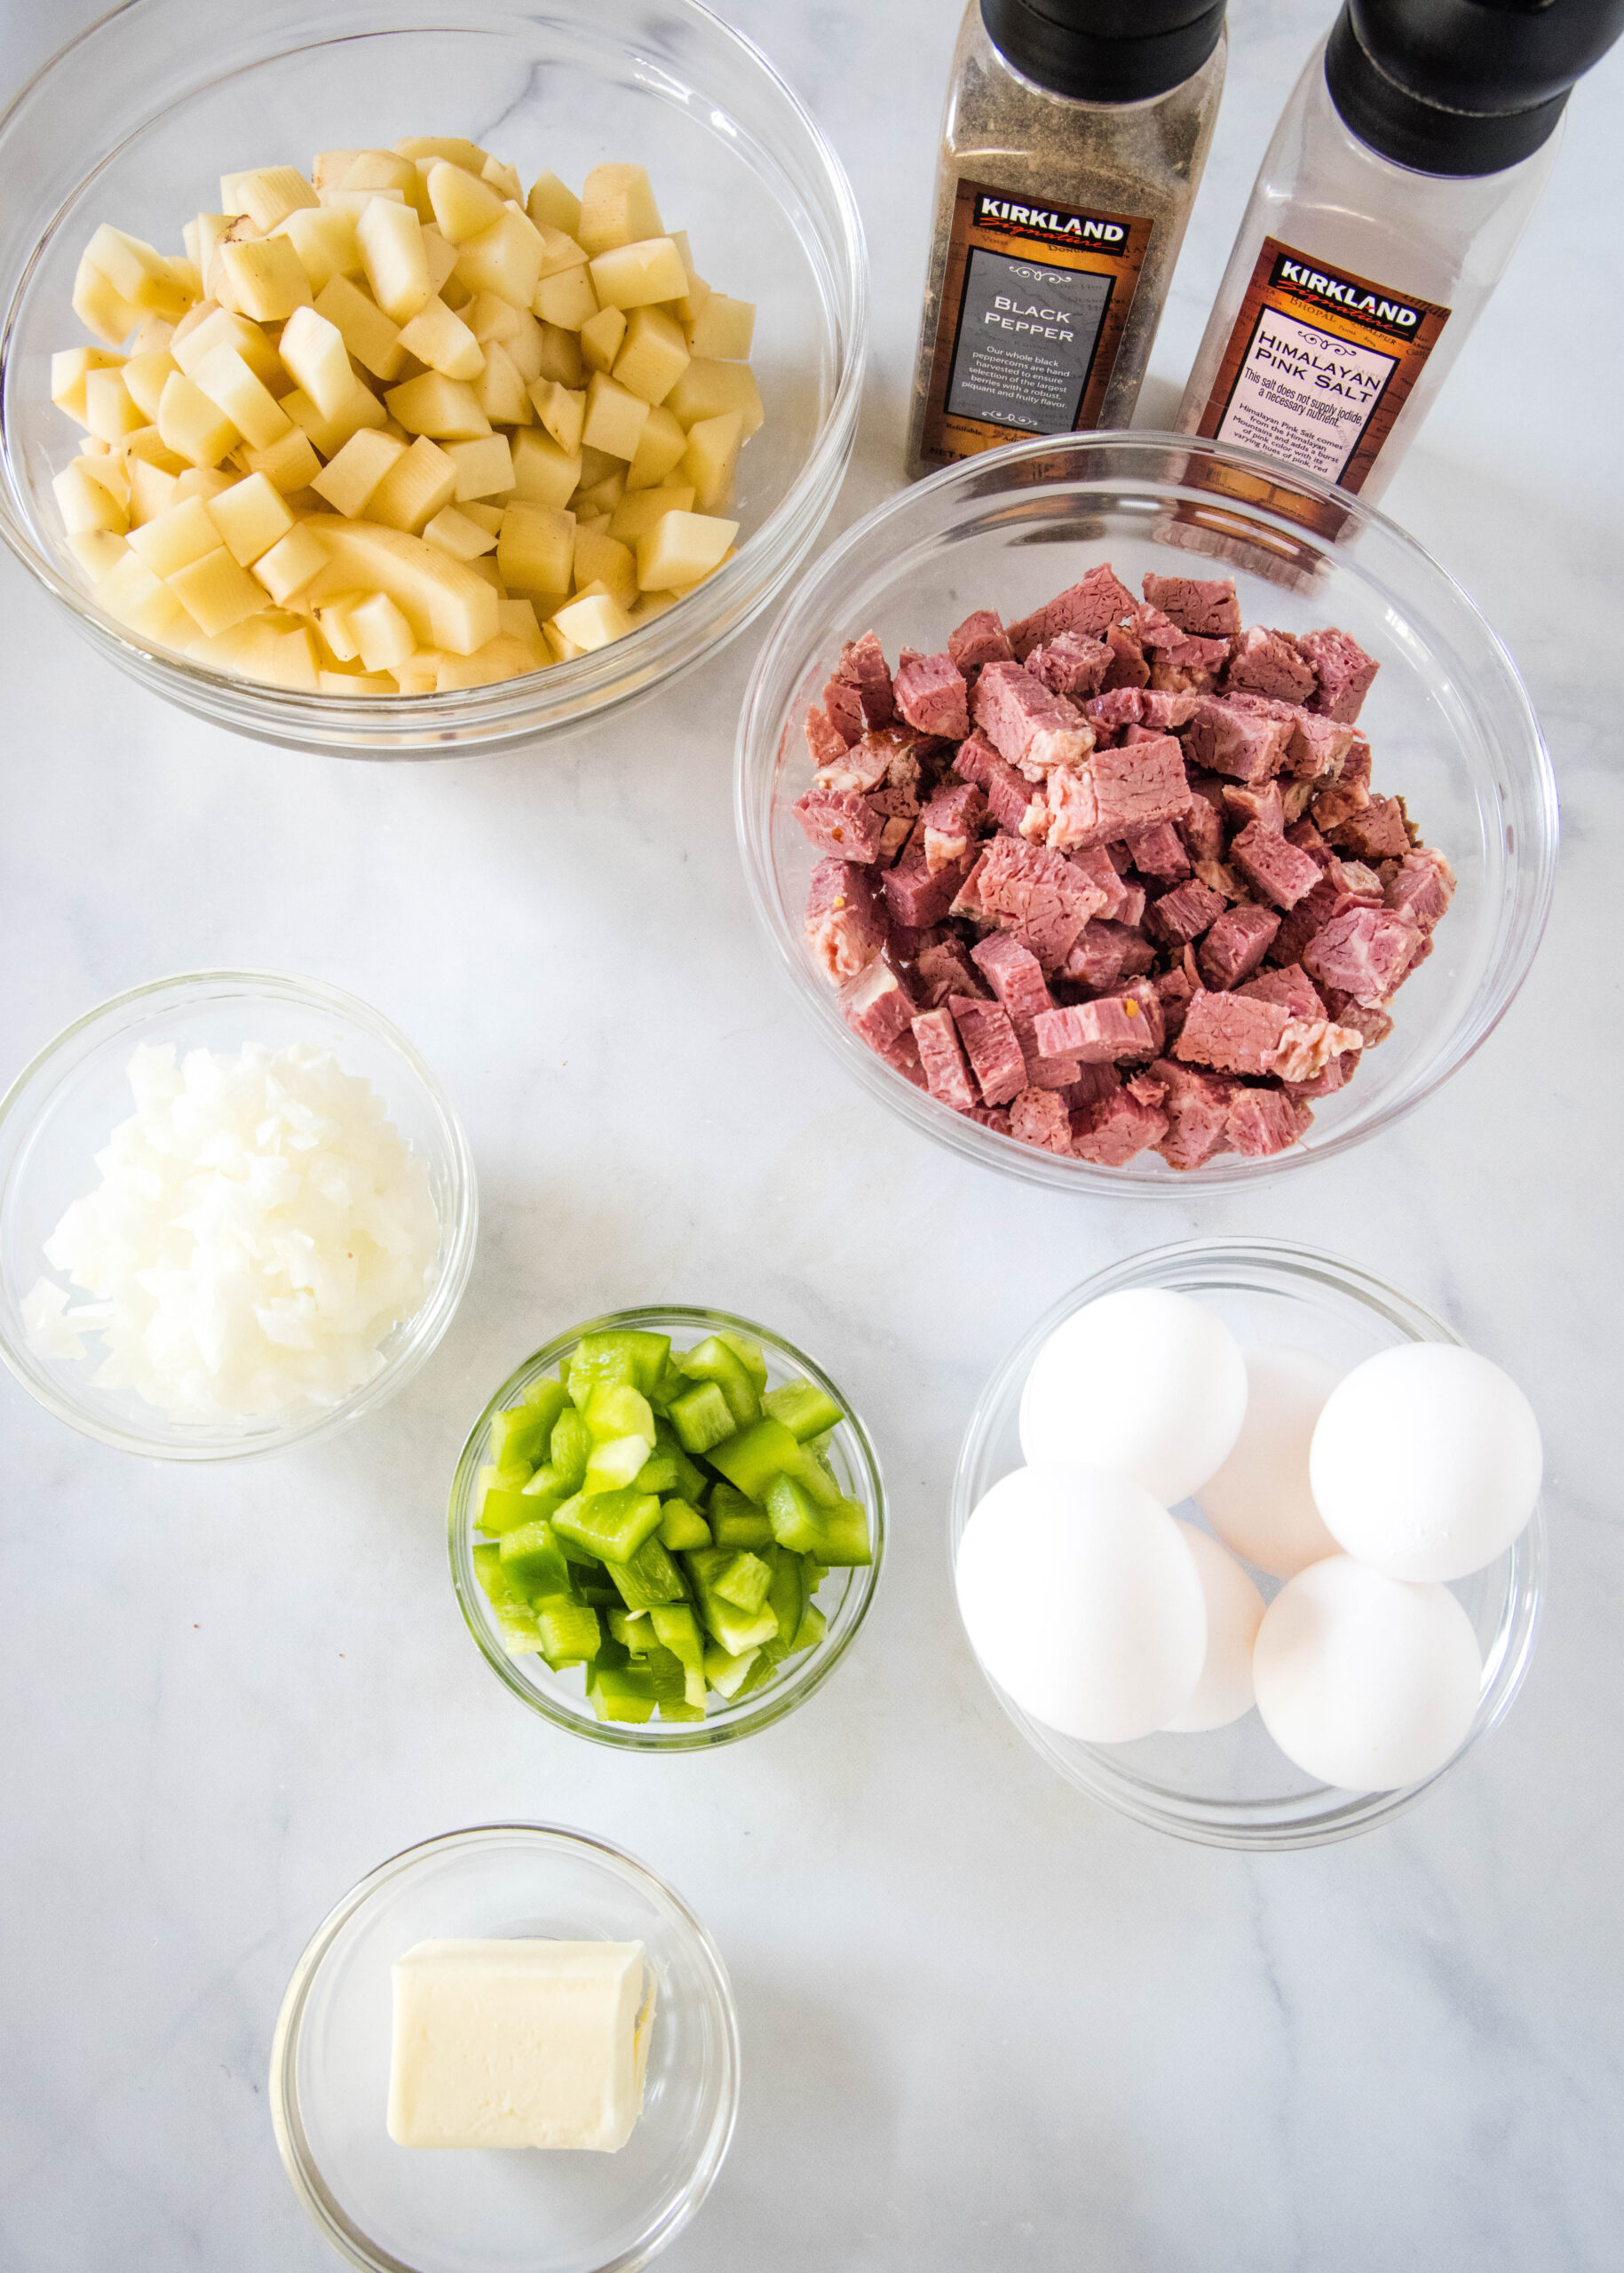 Ingredients for corned beef and hash.